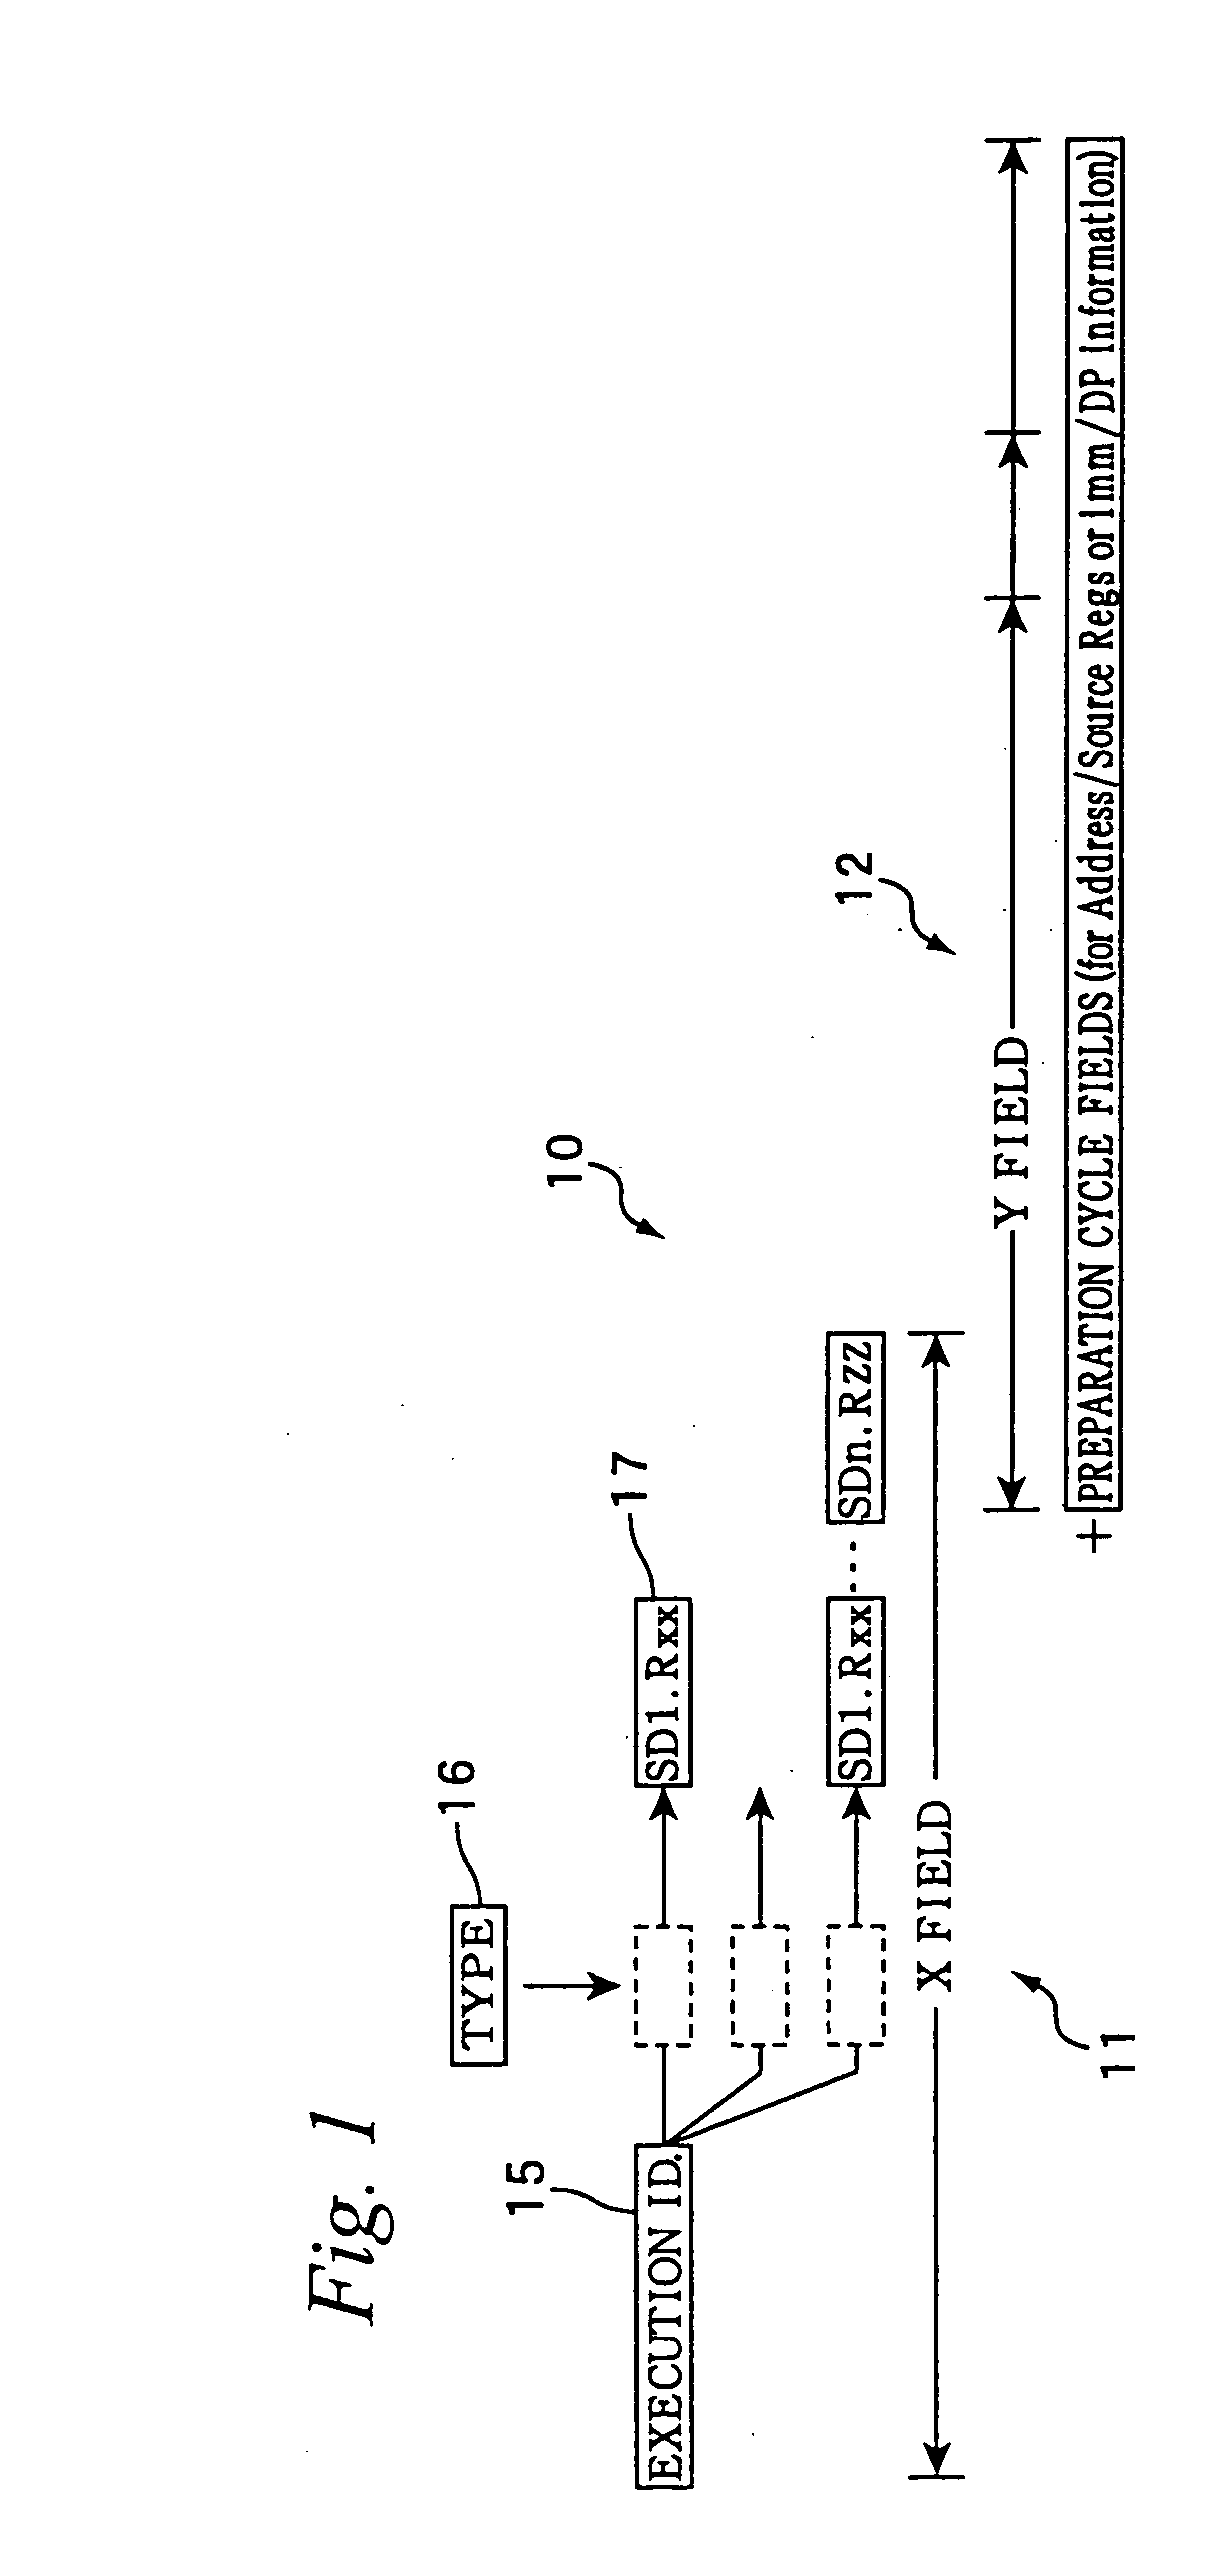 Program product and data processing system